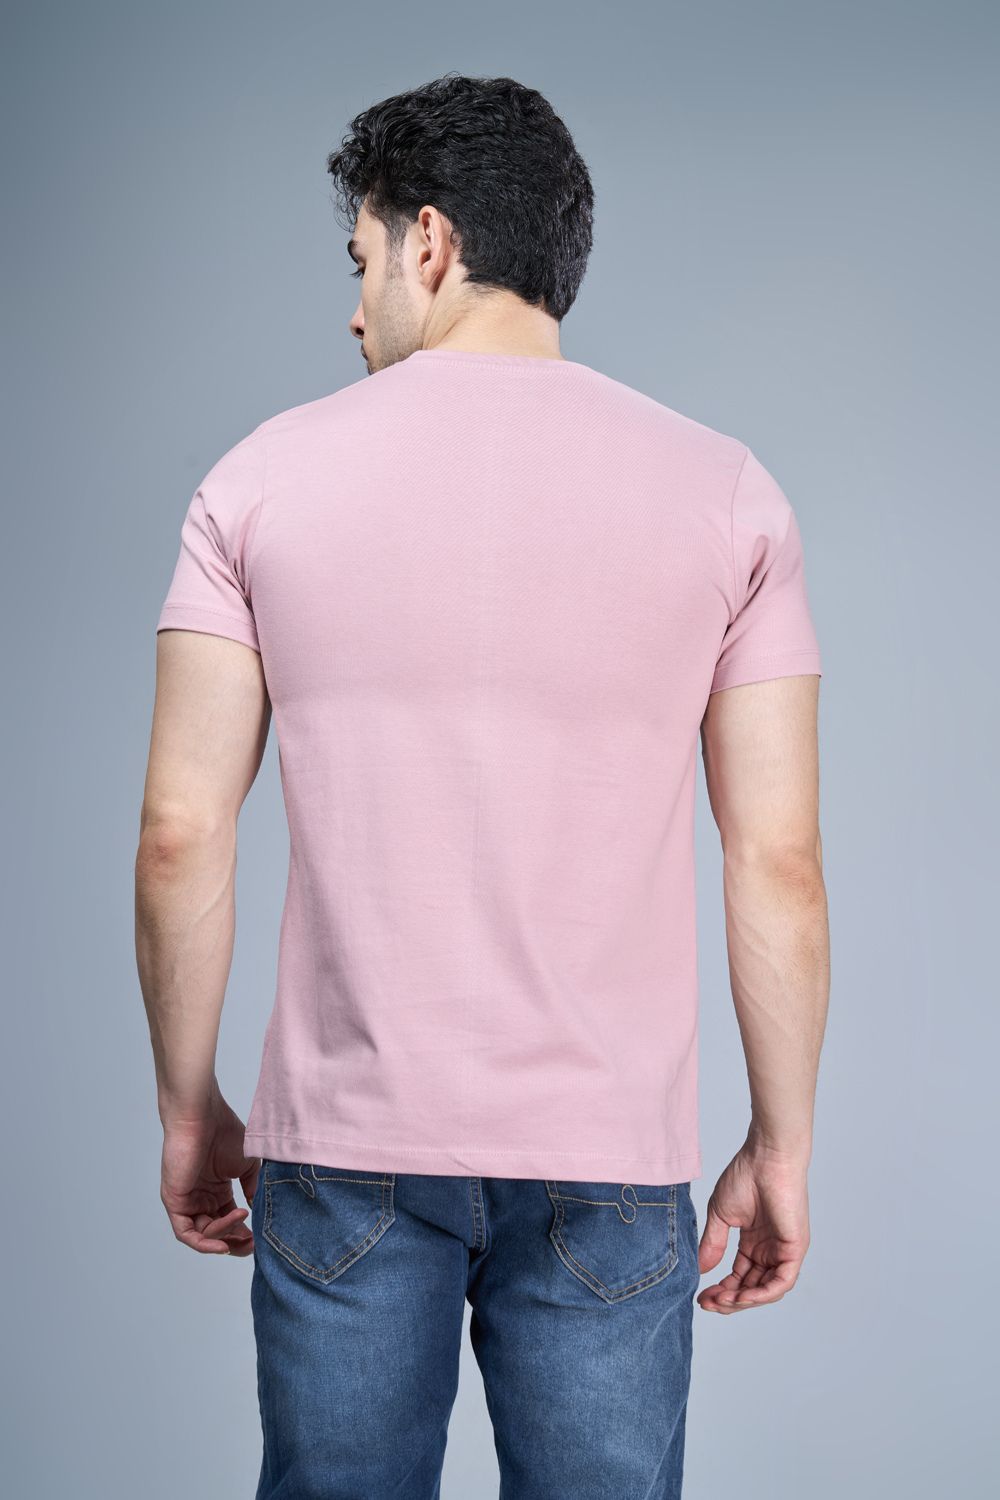 Rose pink colored, cotton Graphic T shirt for men, half sleeves and round neck, back view.